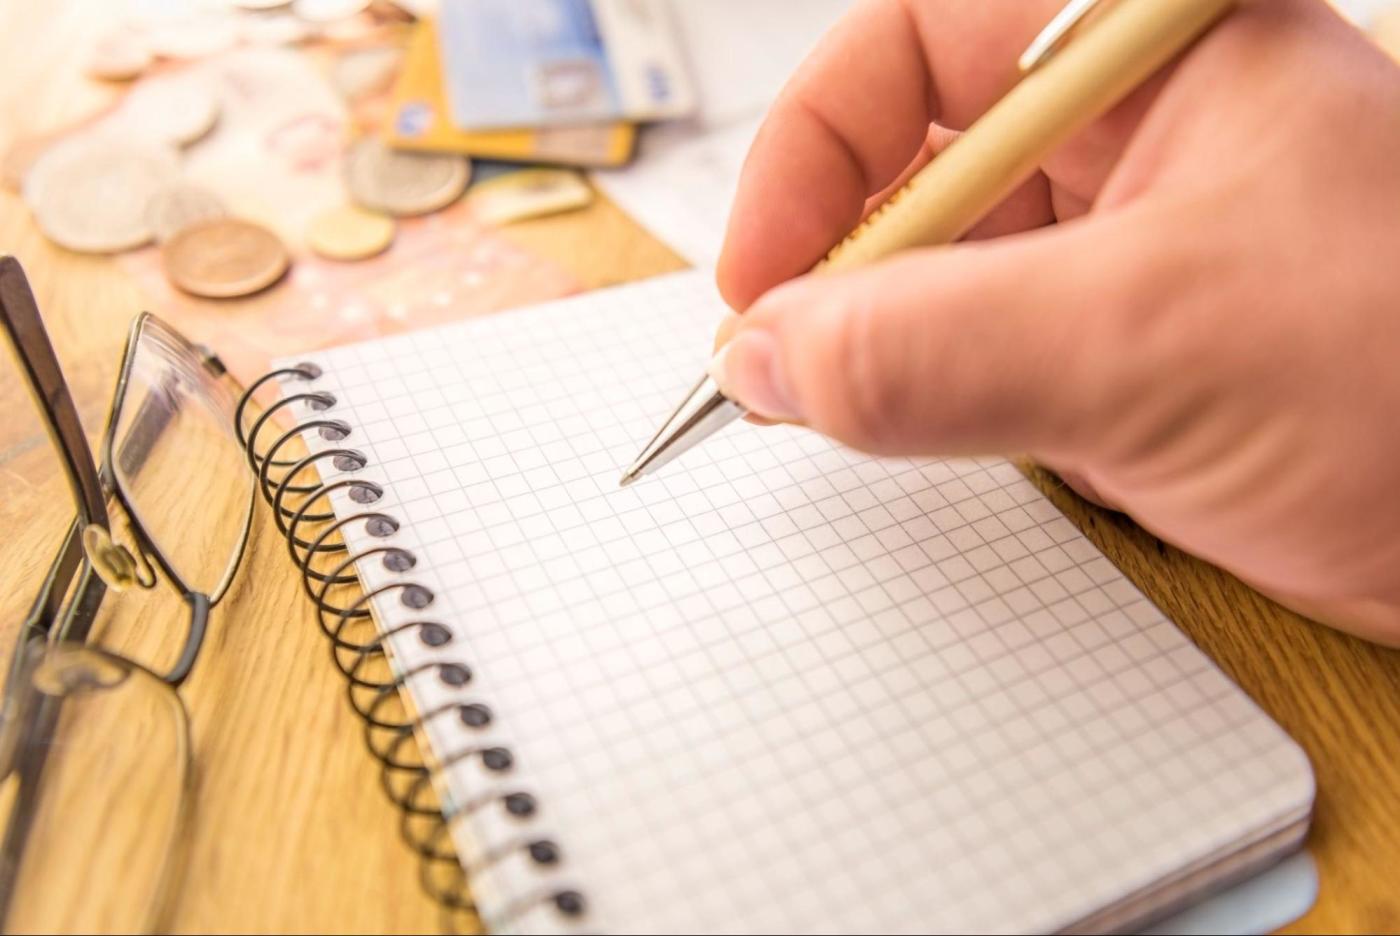 An image of a hand writing on graph paper